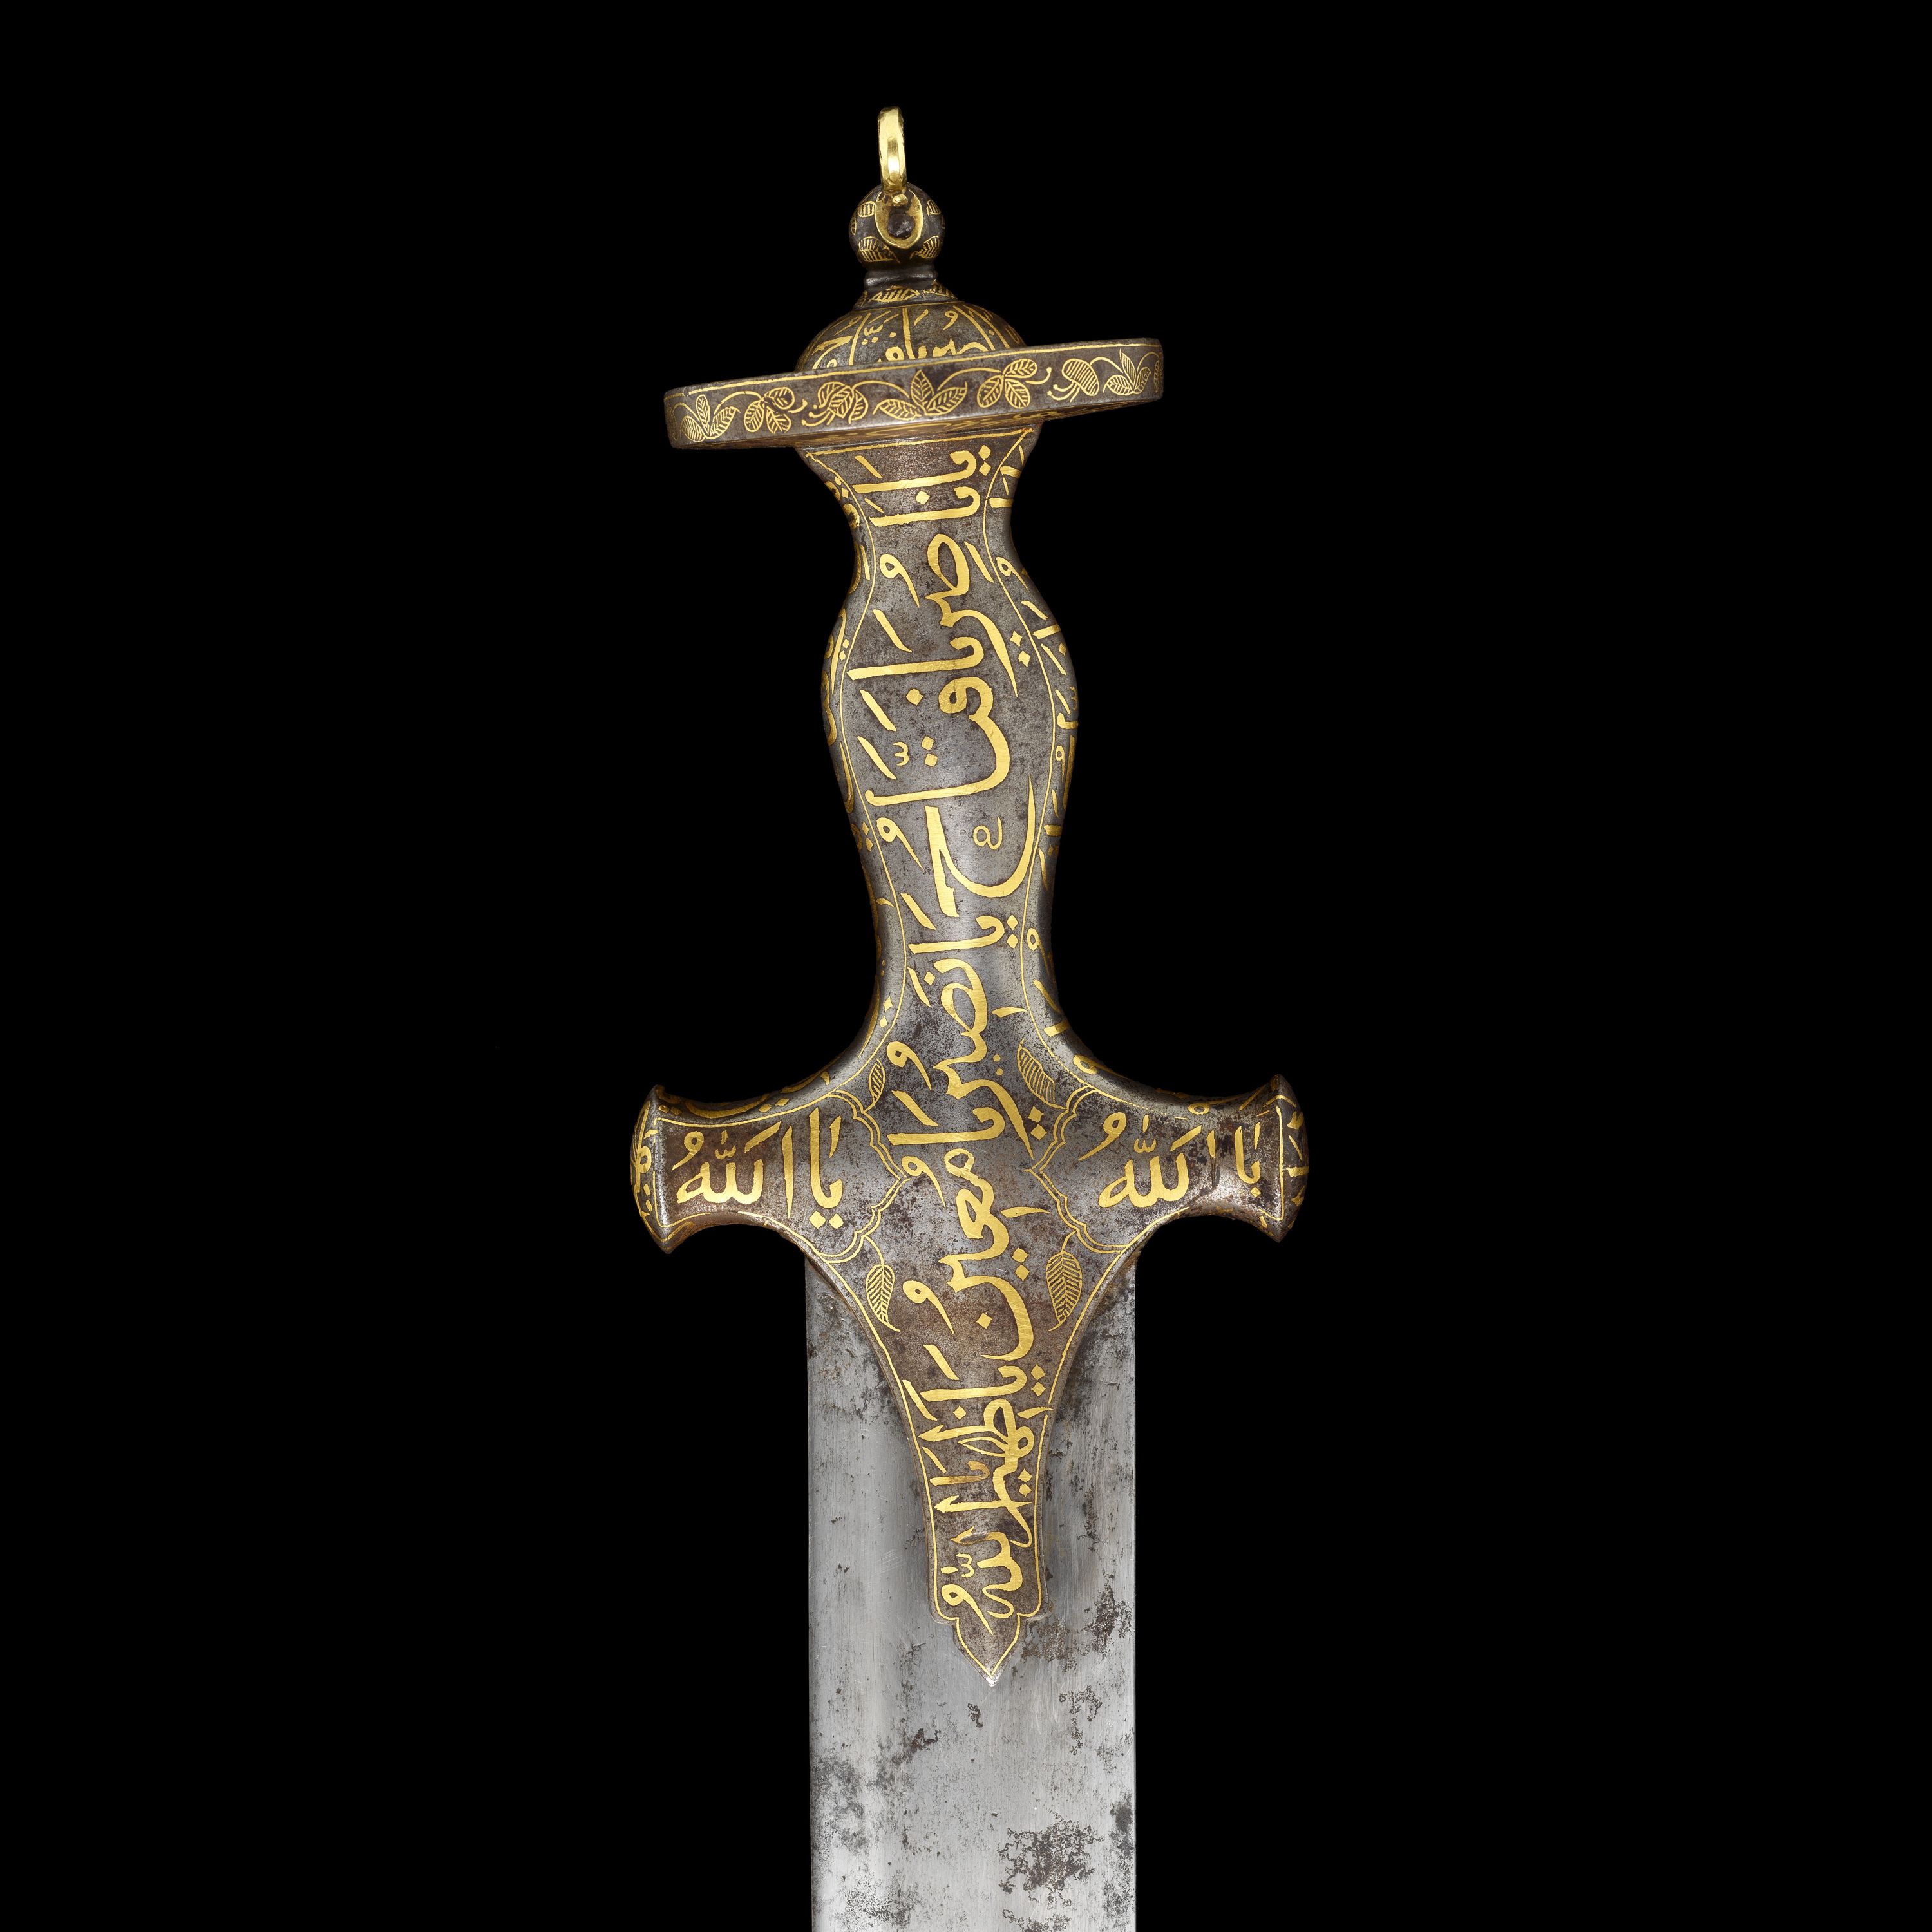 Sword of Indian ruler slain by British sells for more than $17 million at  auction | CNN